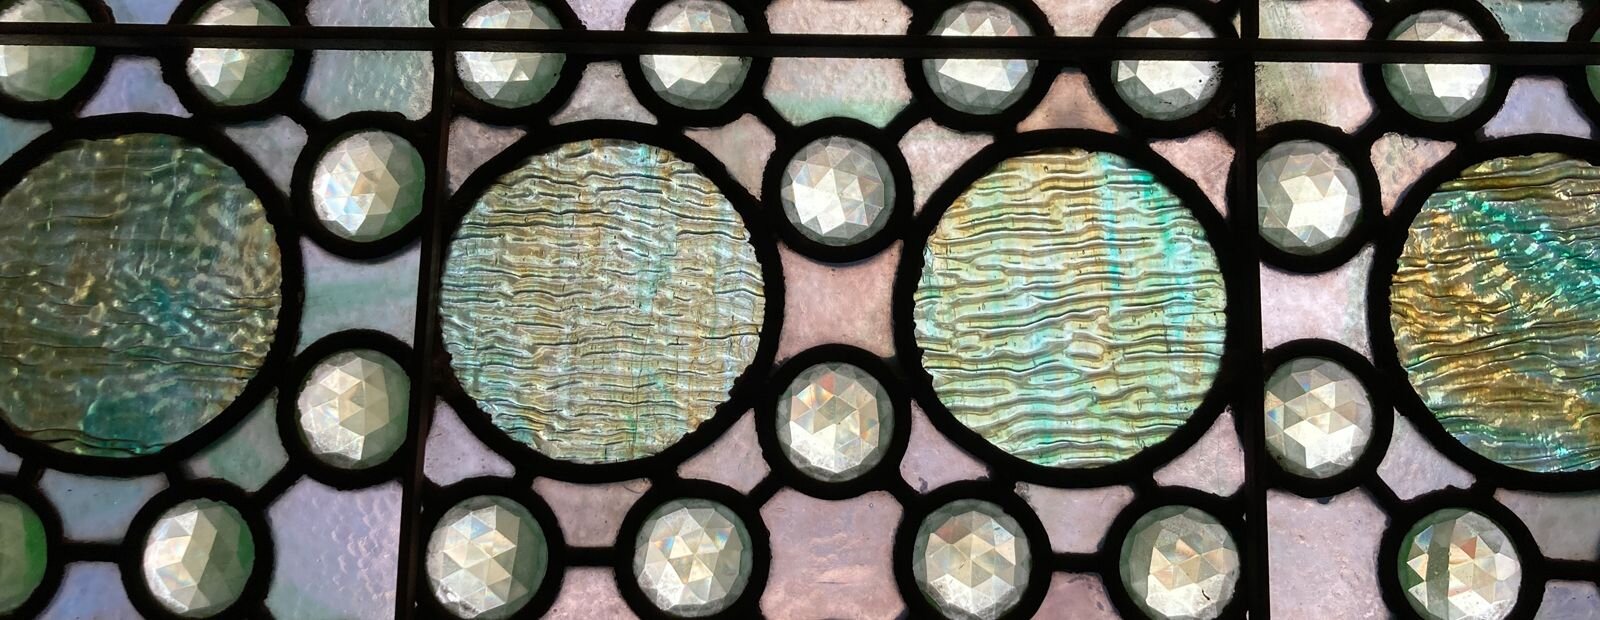 Imperial green glass window designed by Jessie May Livermore